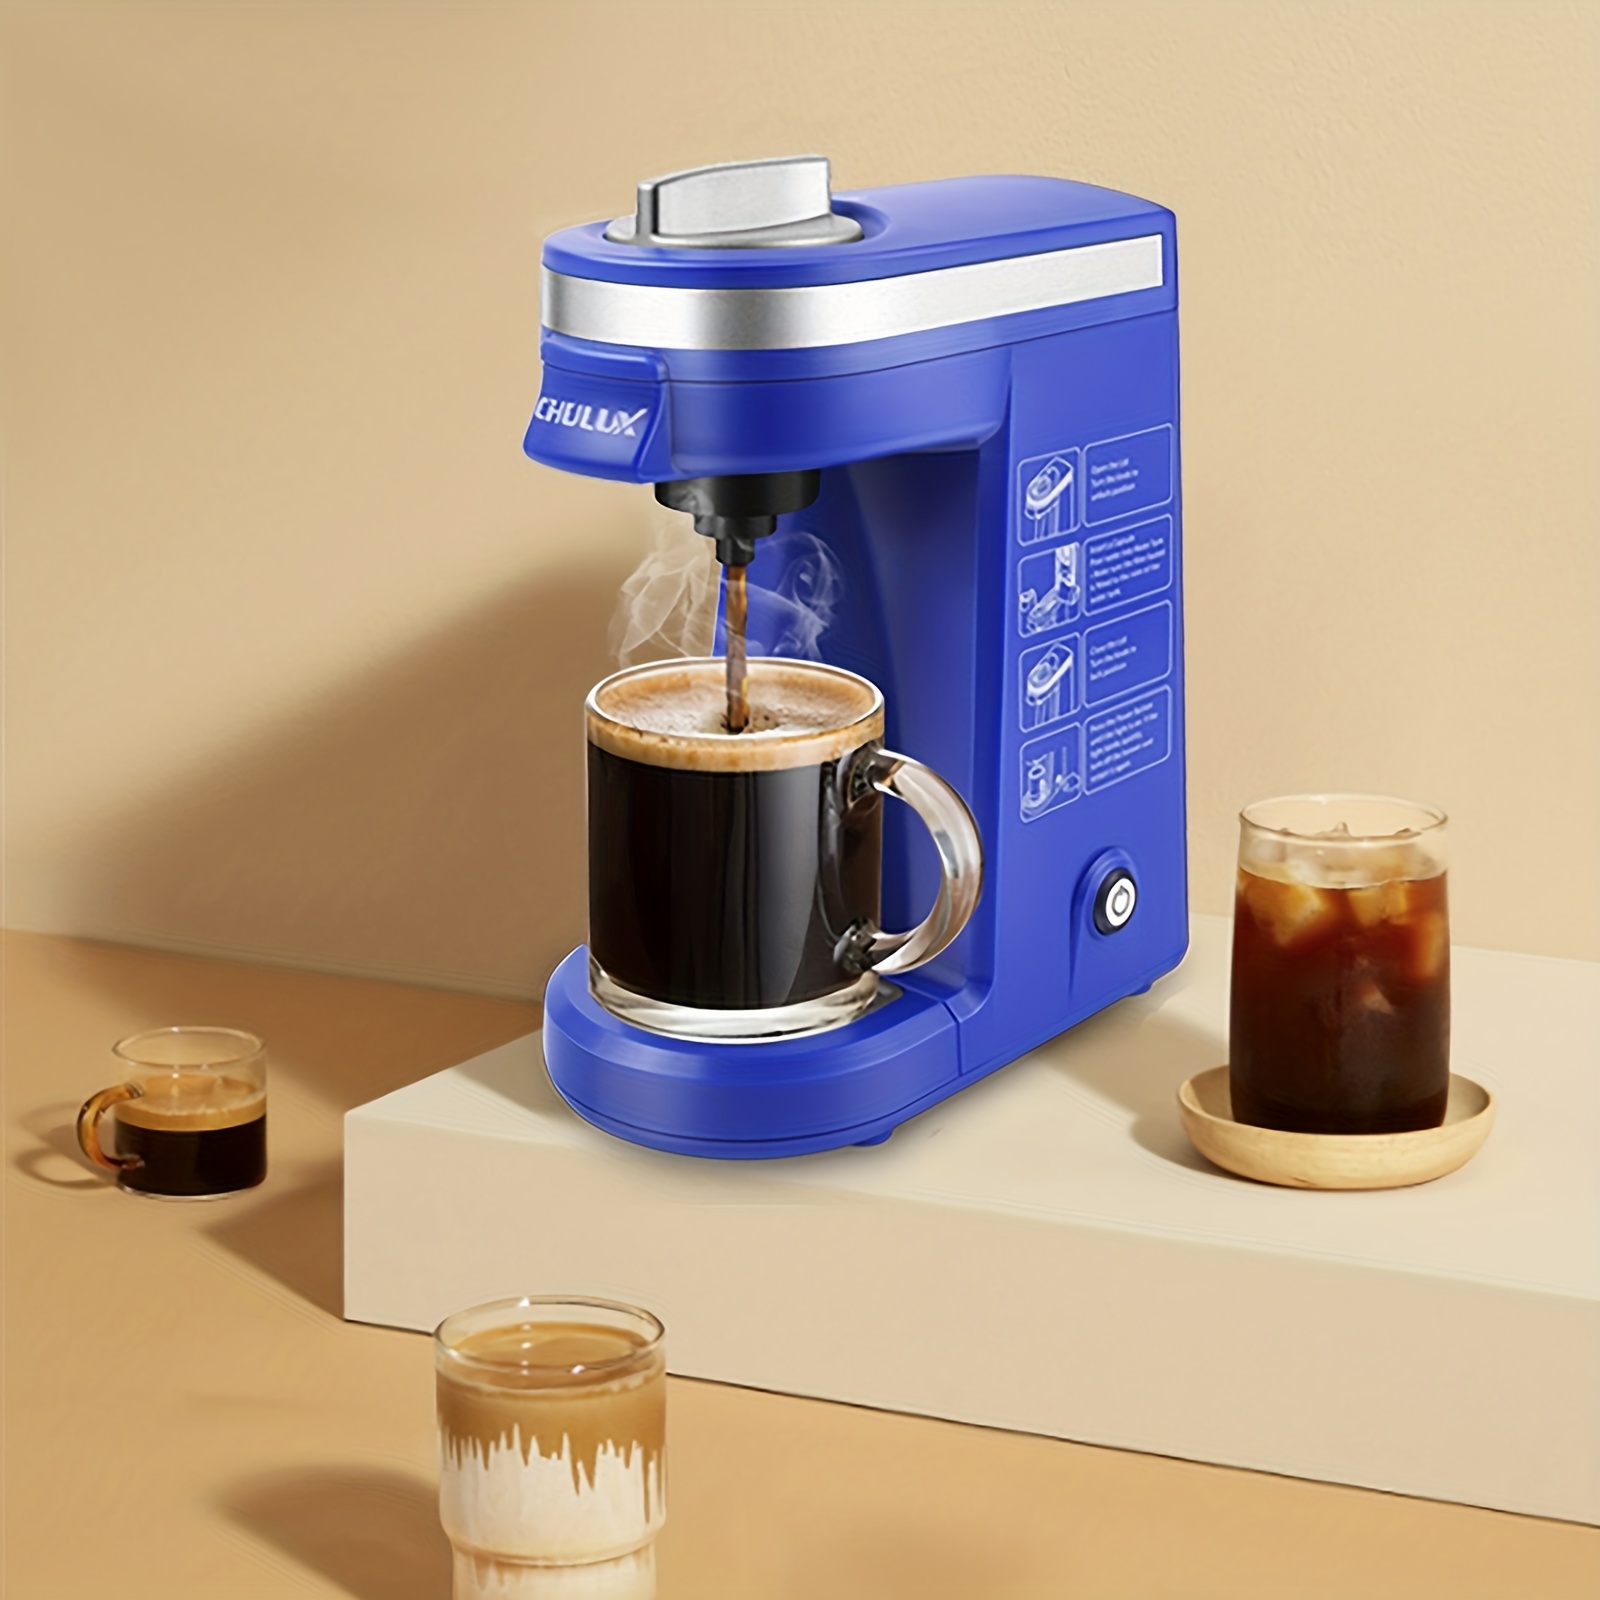 Chulux Coffee Maker Machine Single Cup Pod Coffee Brewer with Quick Brew Technology Blue